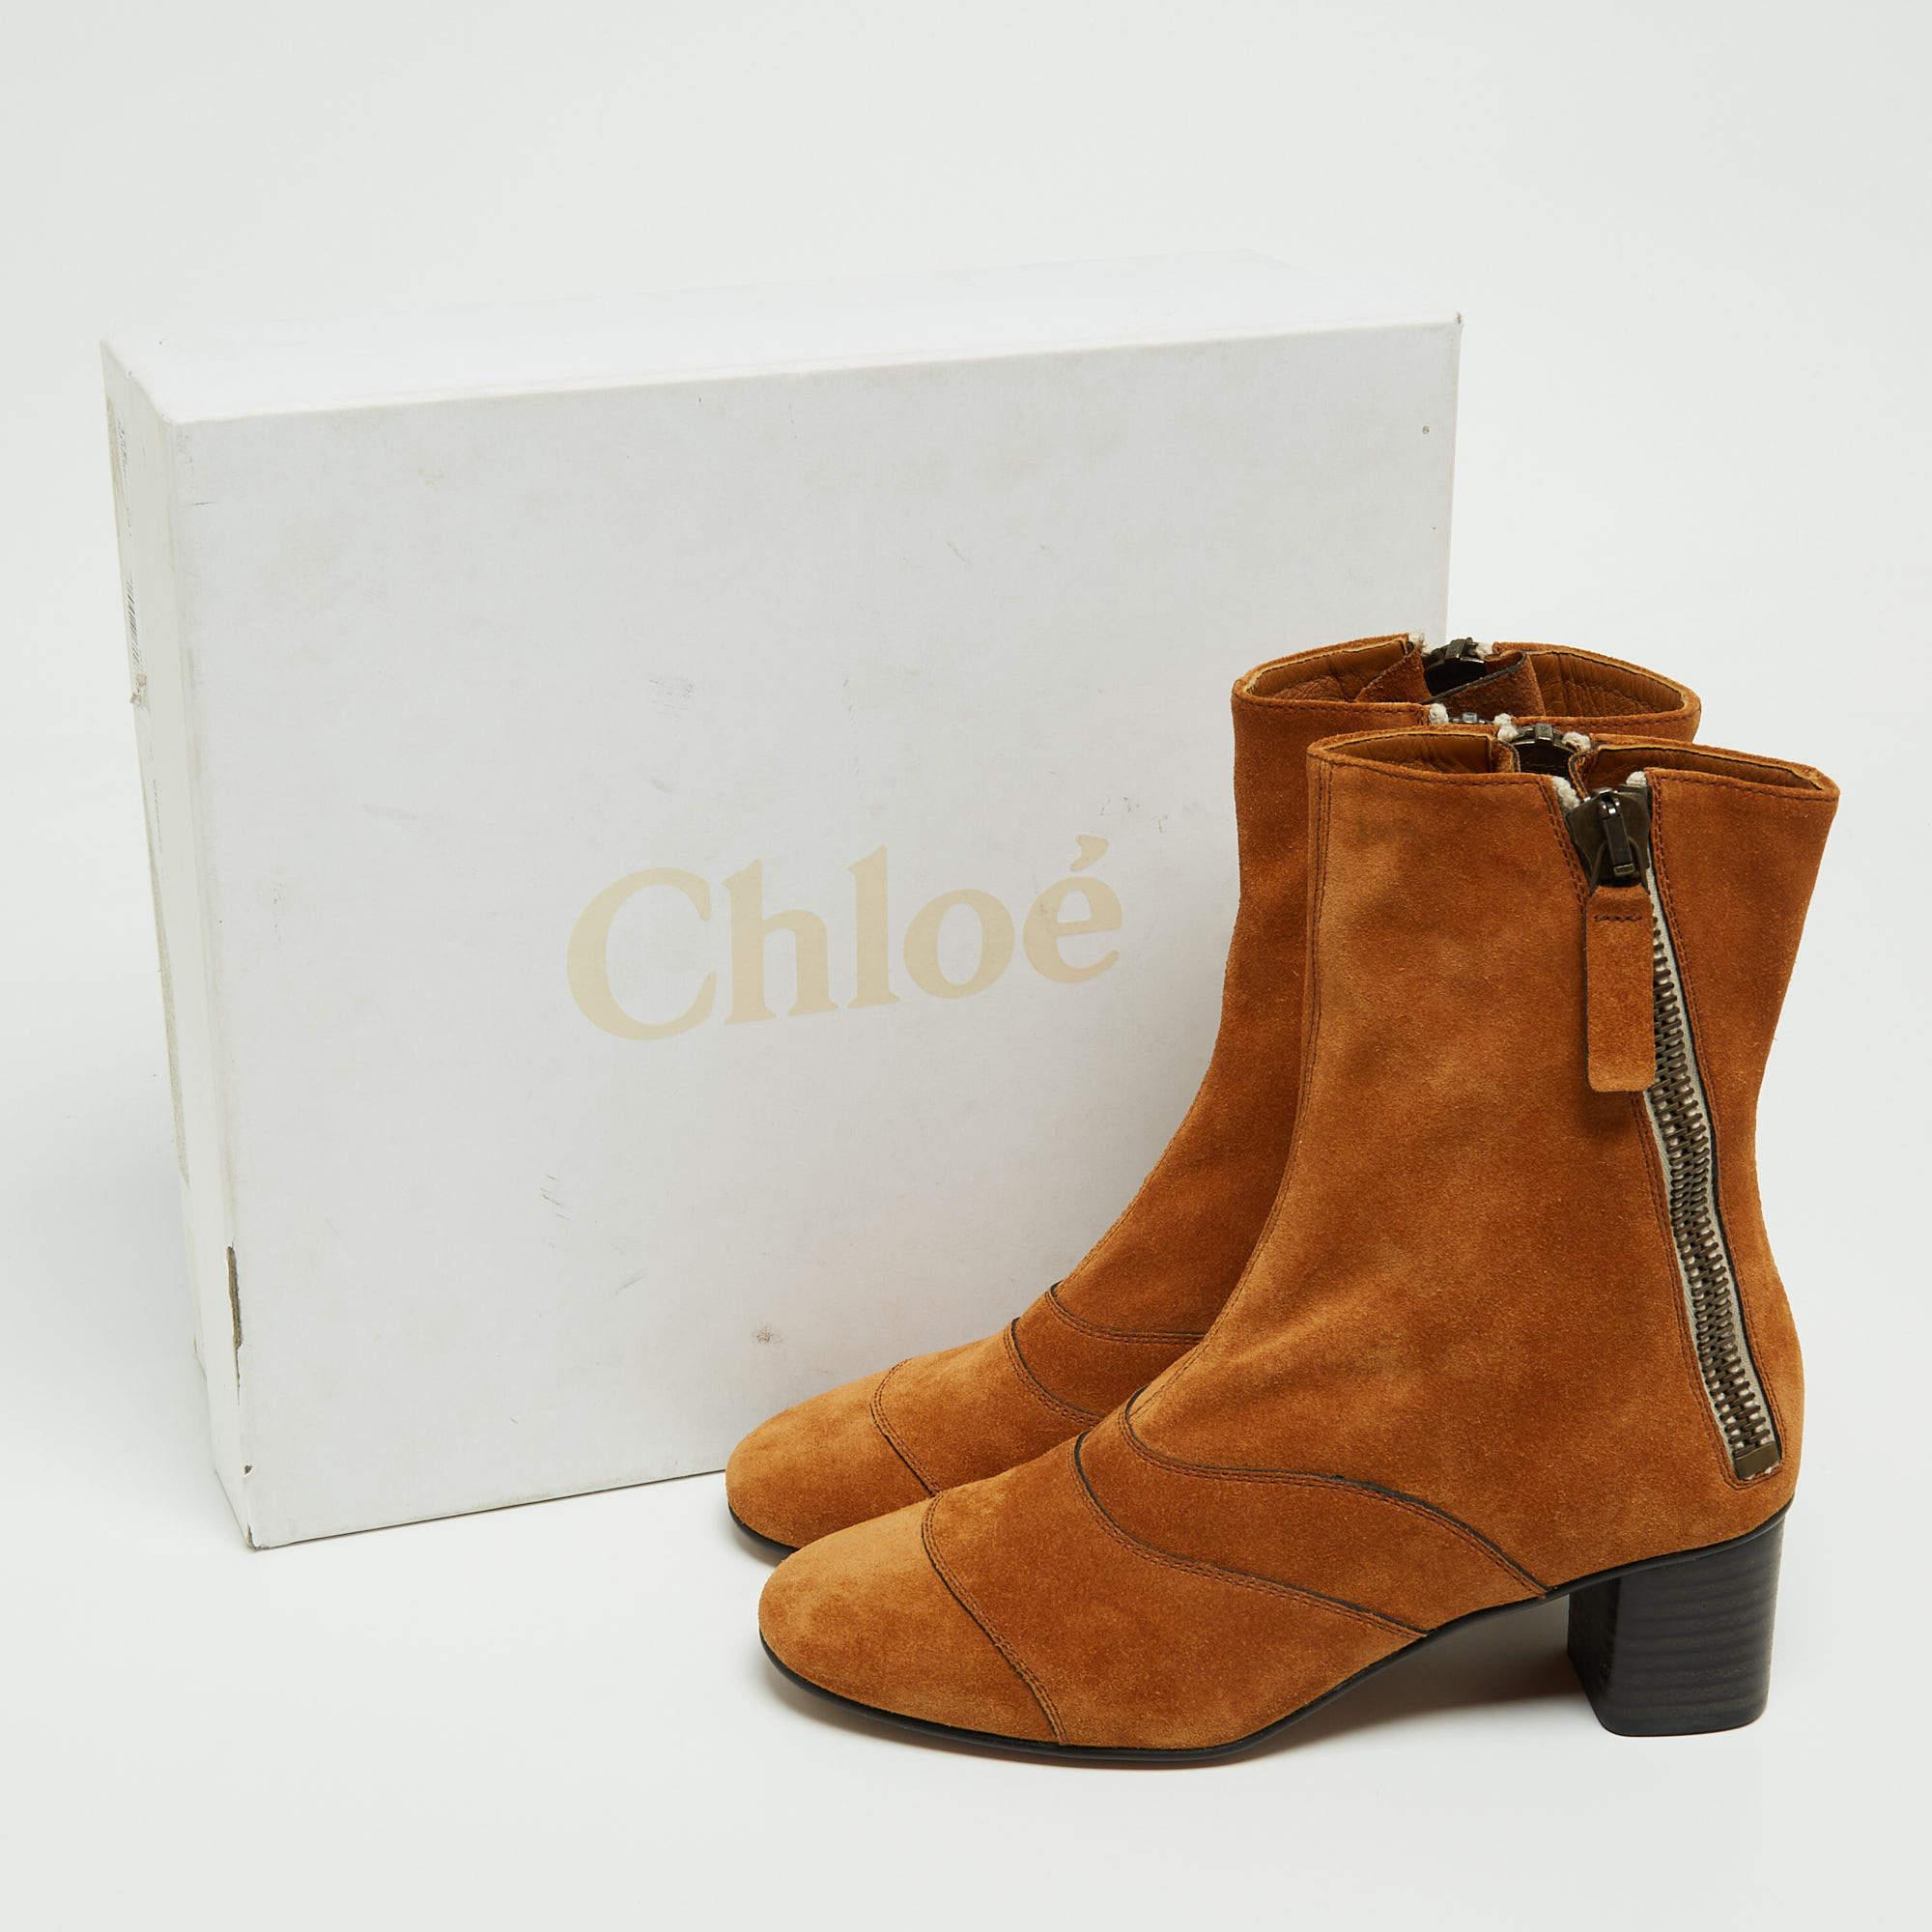 Chloe Brown Suede Ankle Boots Size 36 6